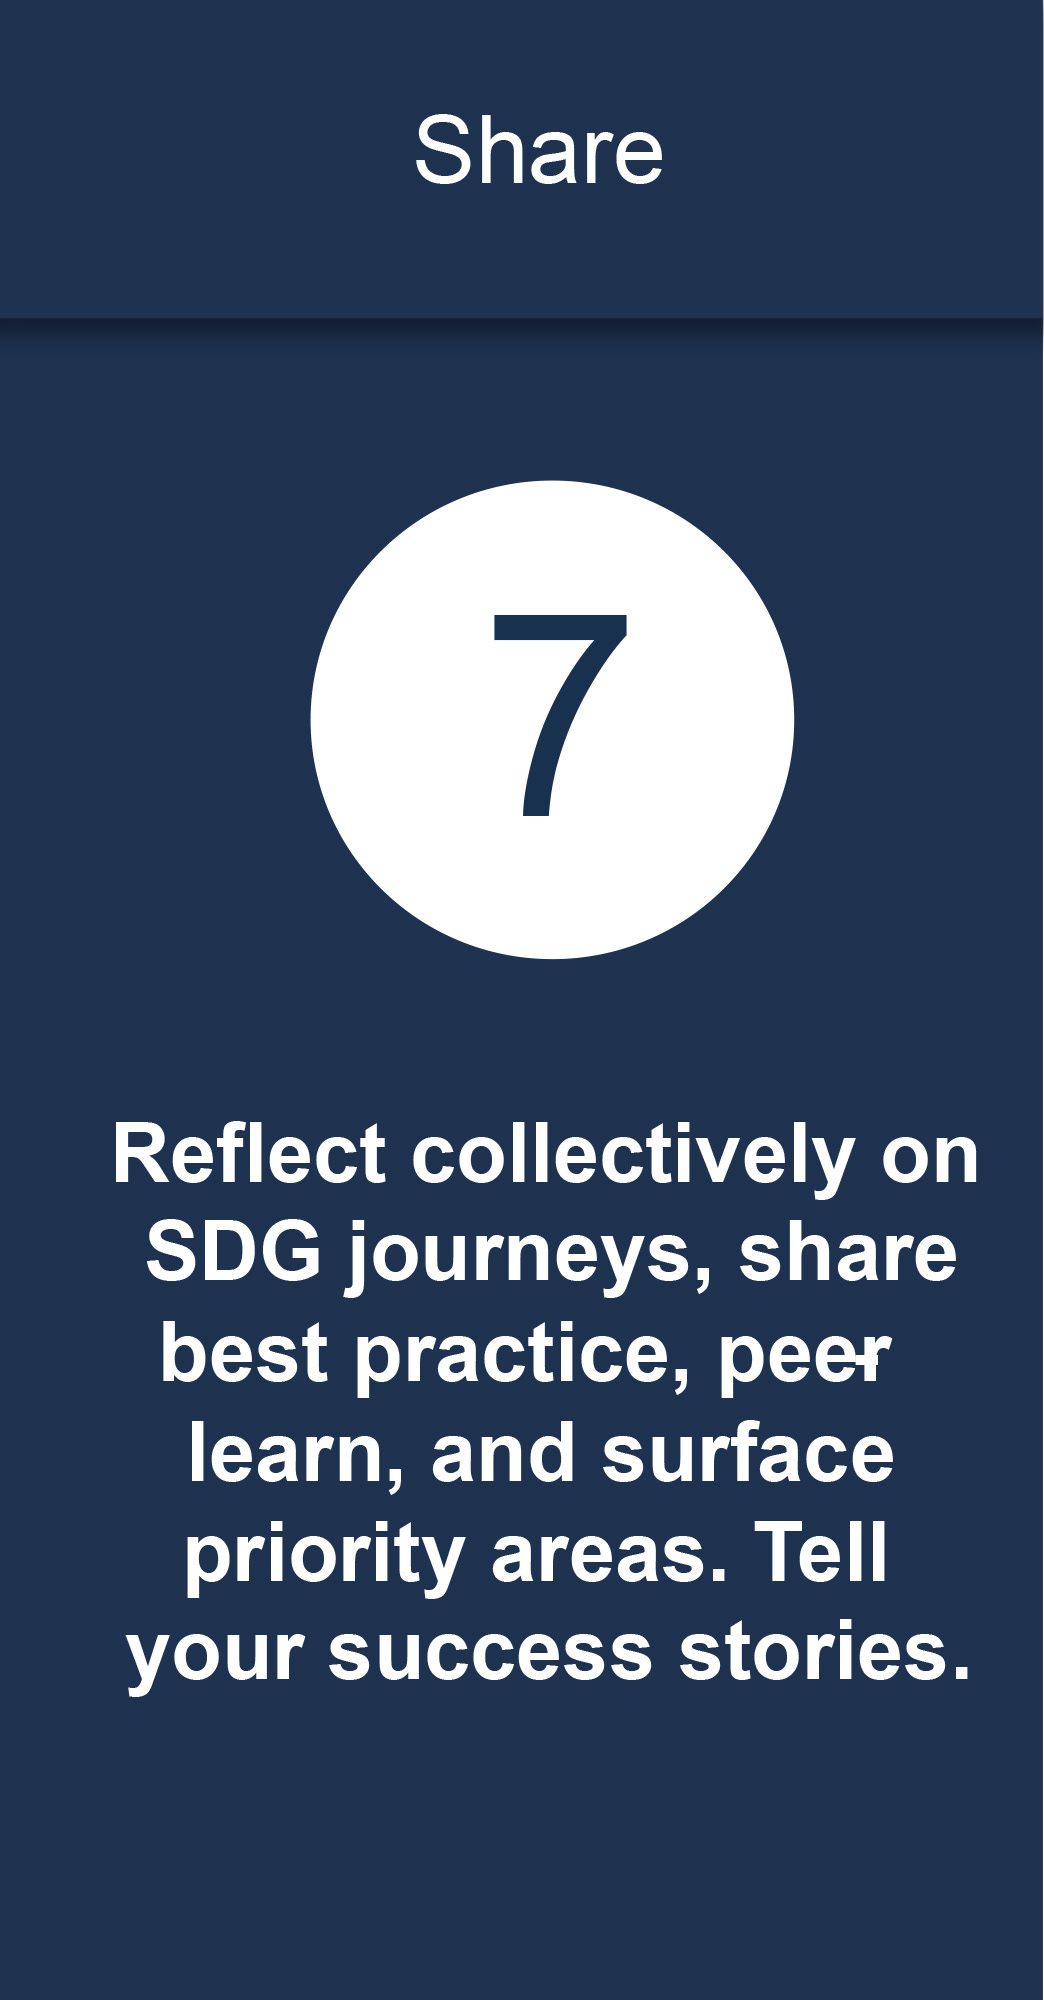 Reflect collectively on SDG journeys, share best practice, peer-learn, and surface priority areas. Tell your success stories.